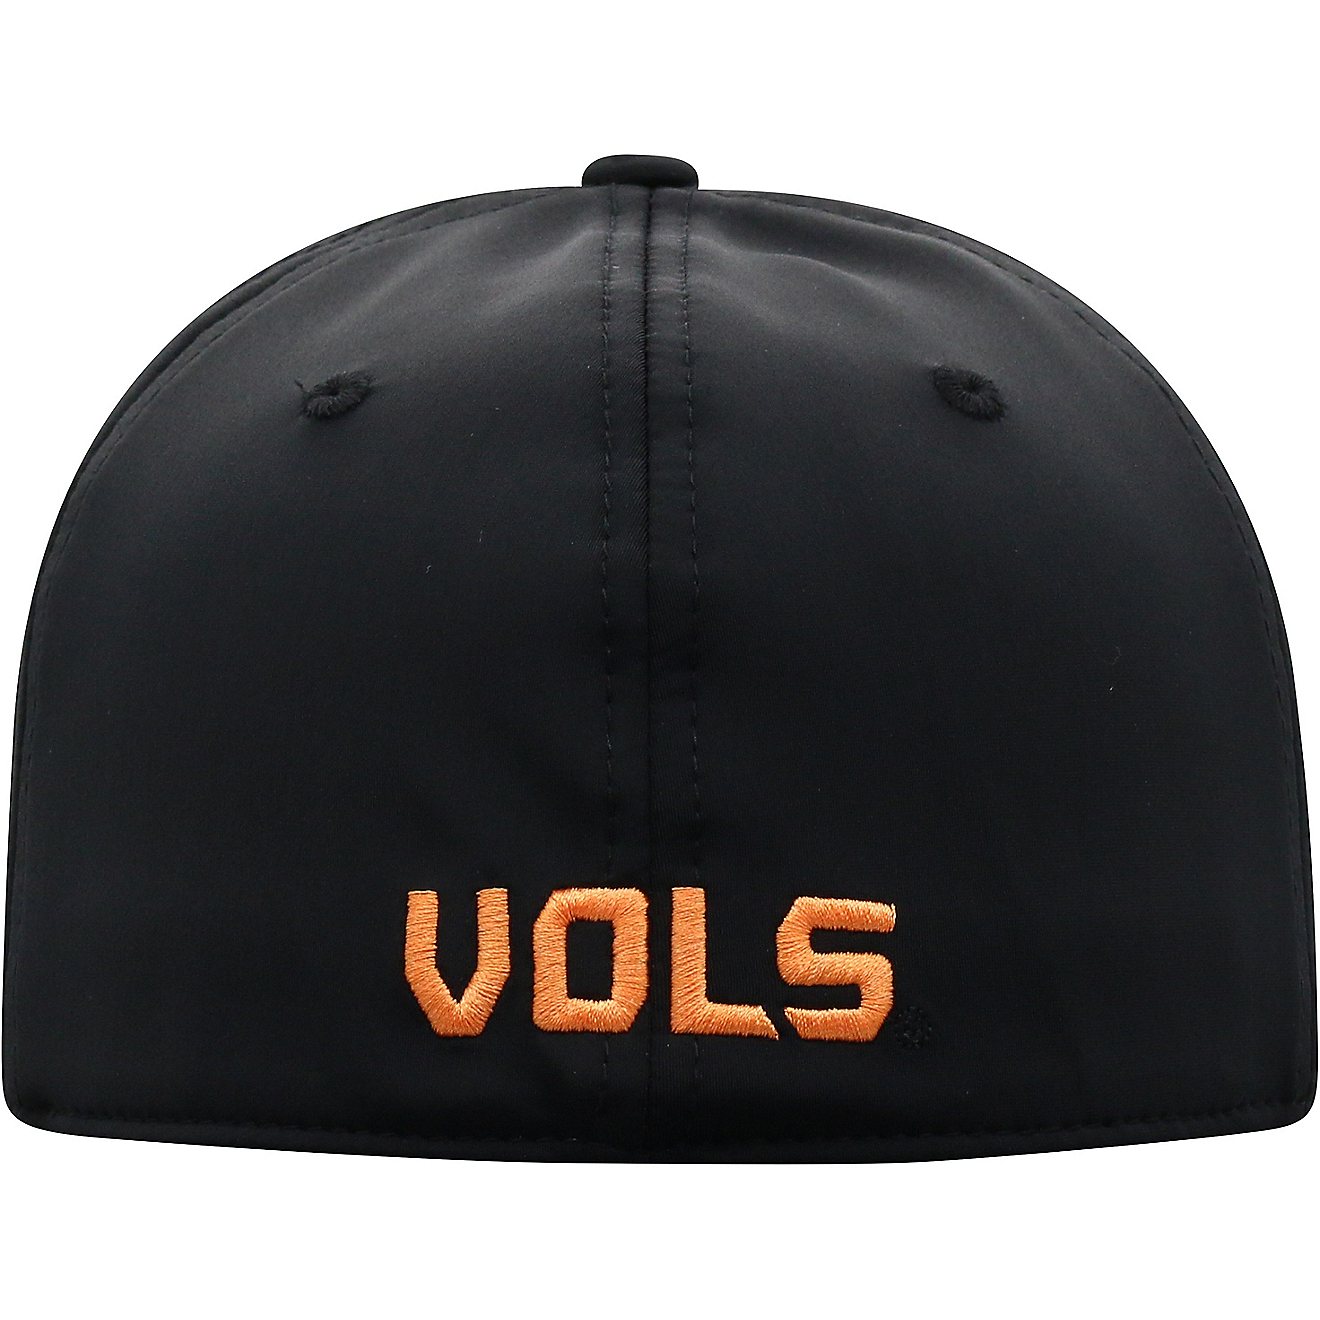 Top of the World Men's University of Tennessee Tag Ball Cap                                                                      - view number 4